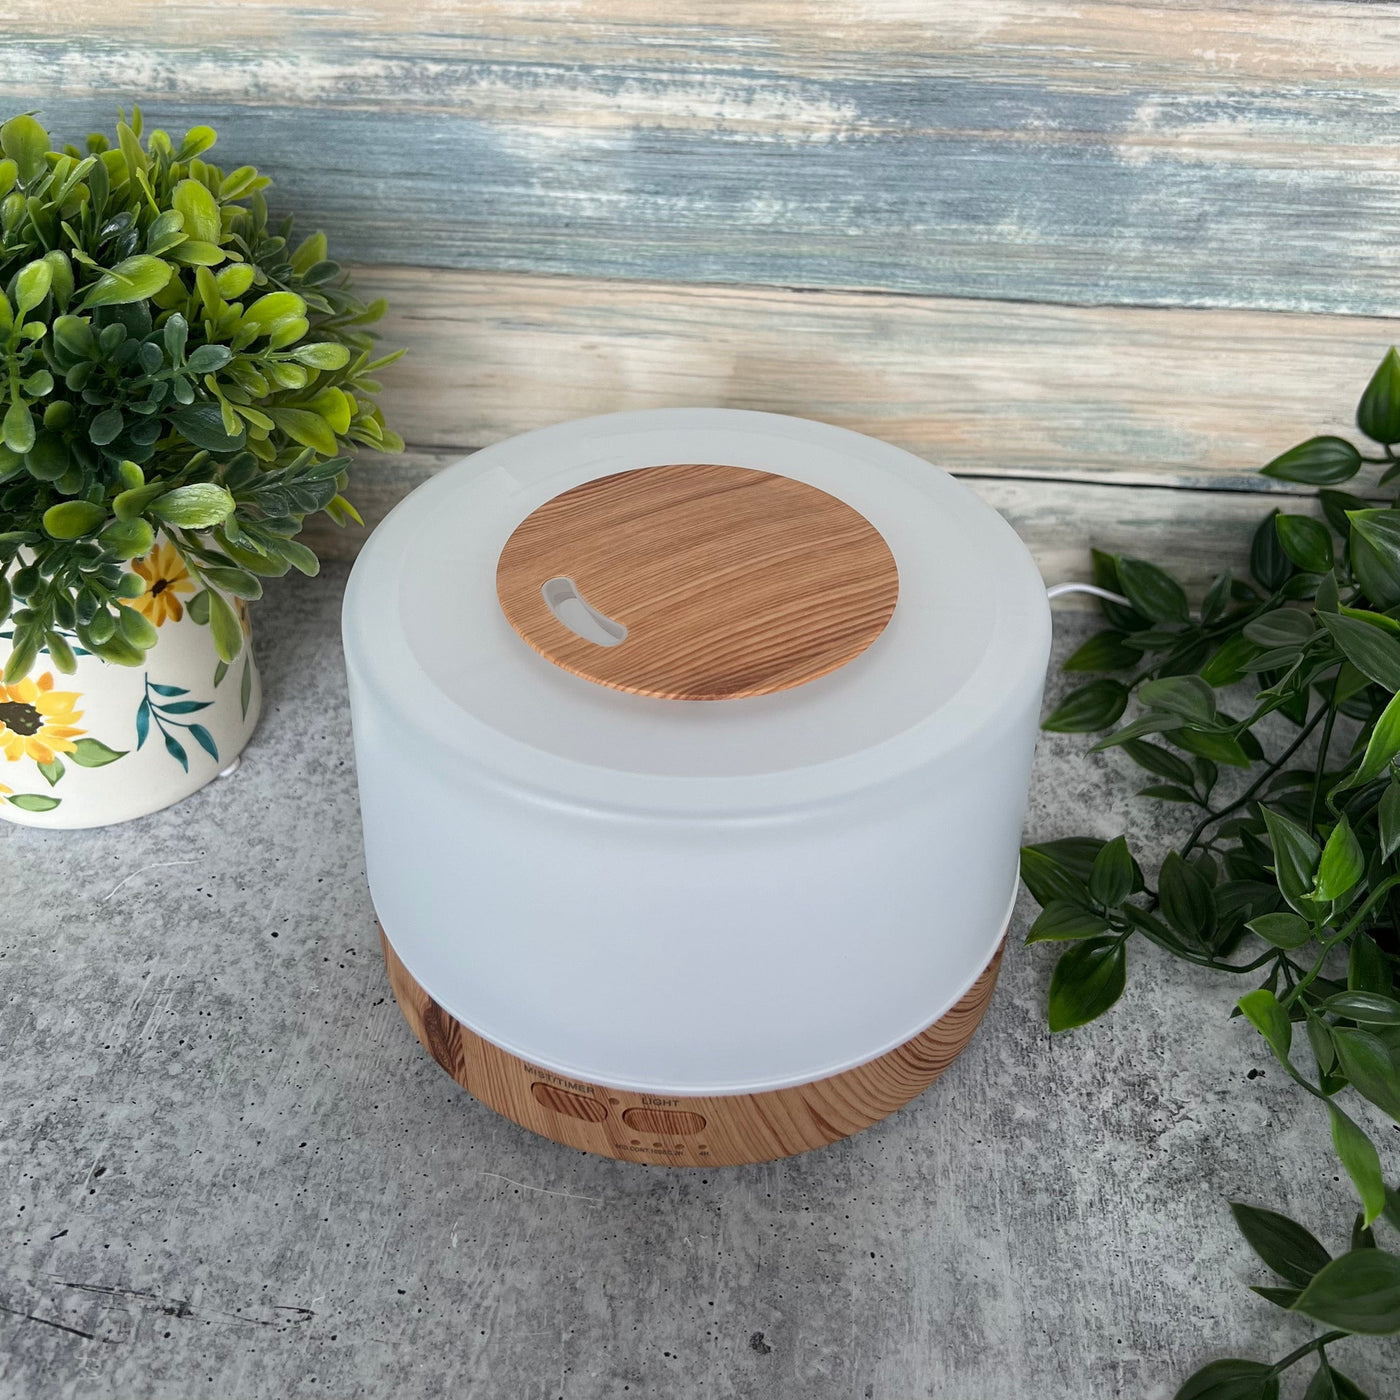 Layla - 500ml Aromatherapy Essential Oil Diffuser